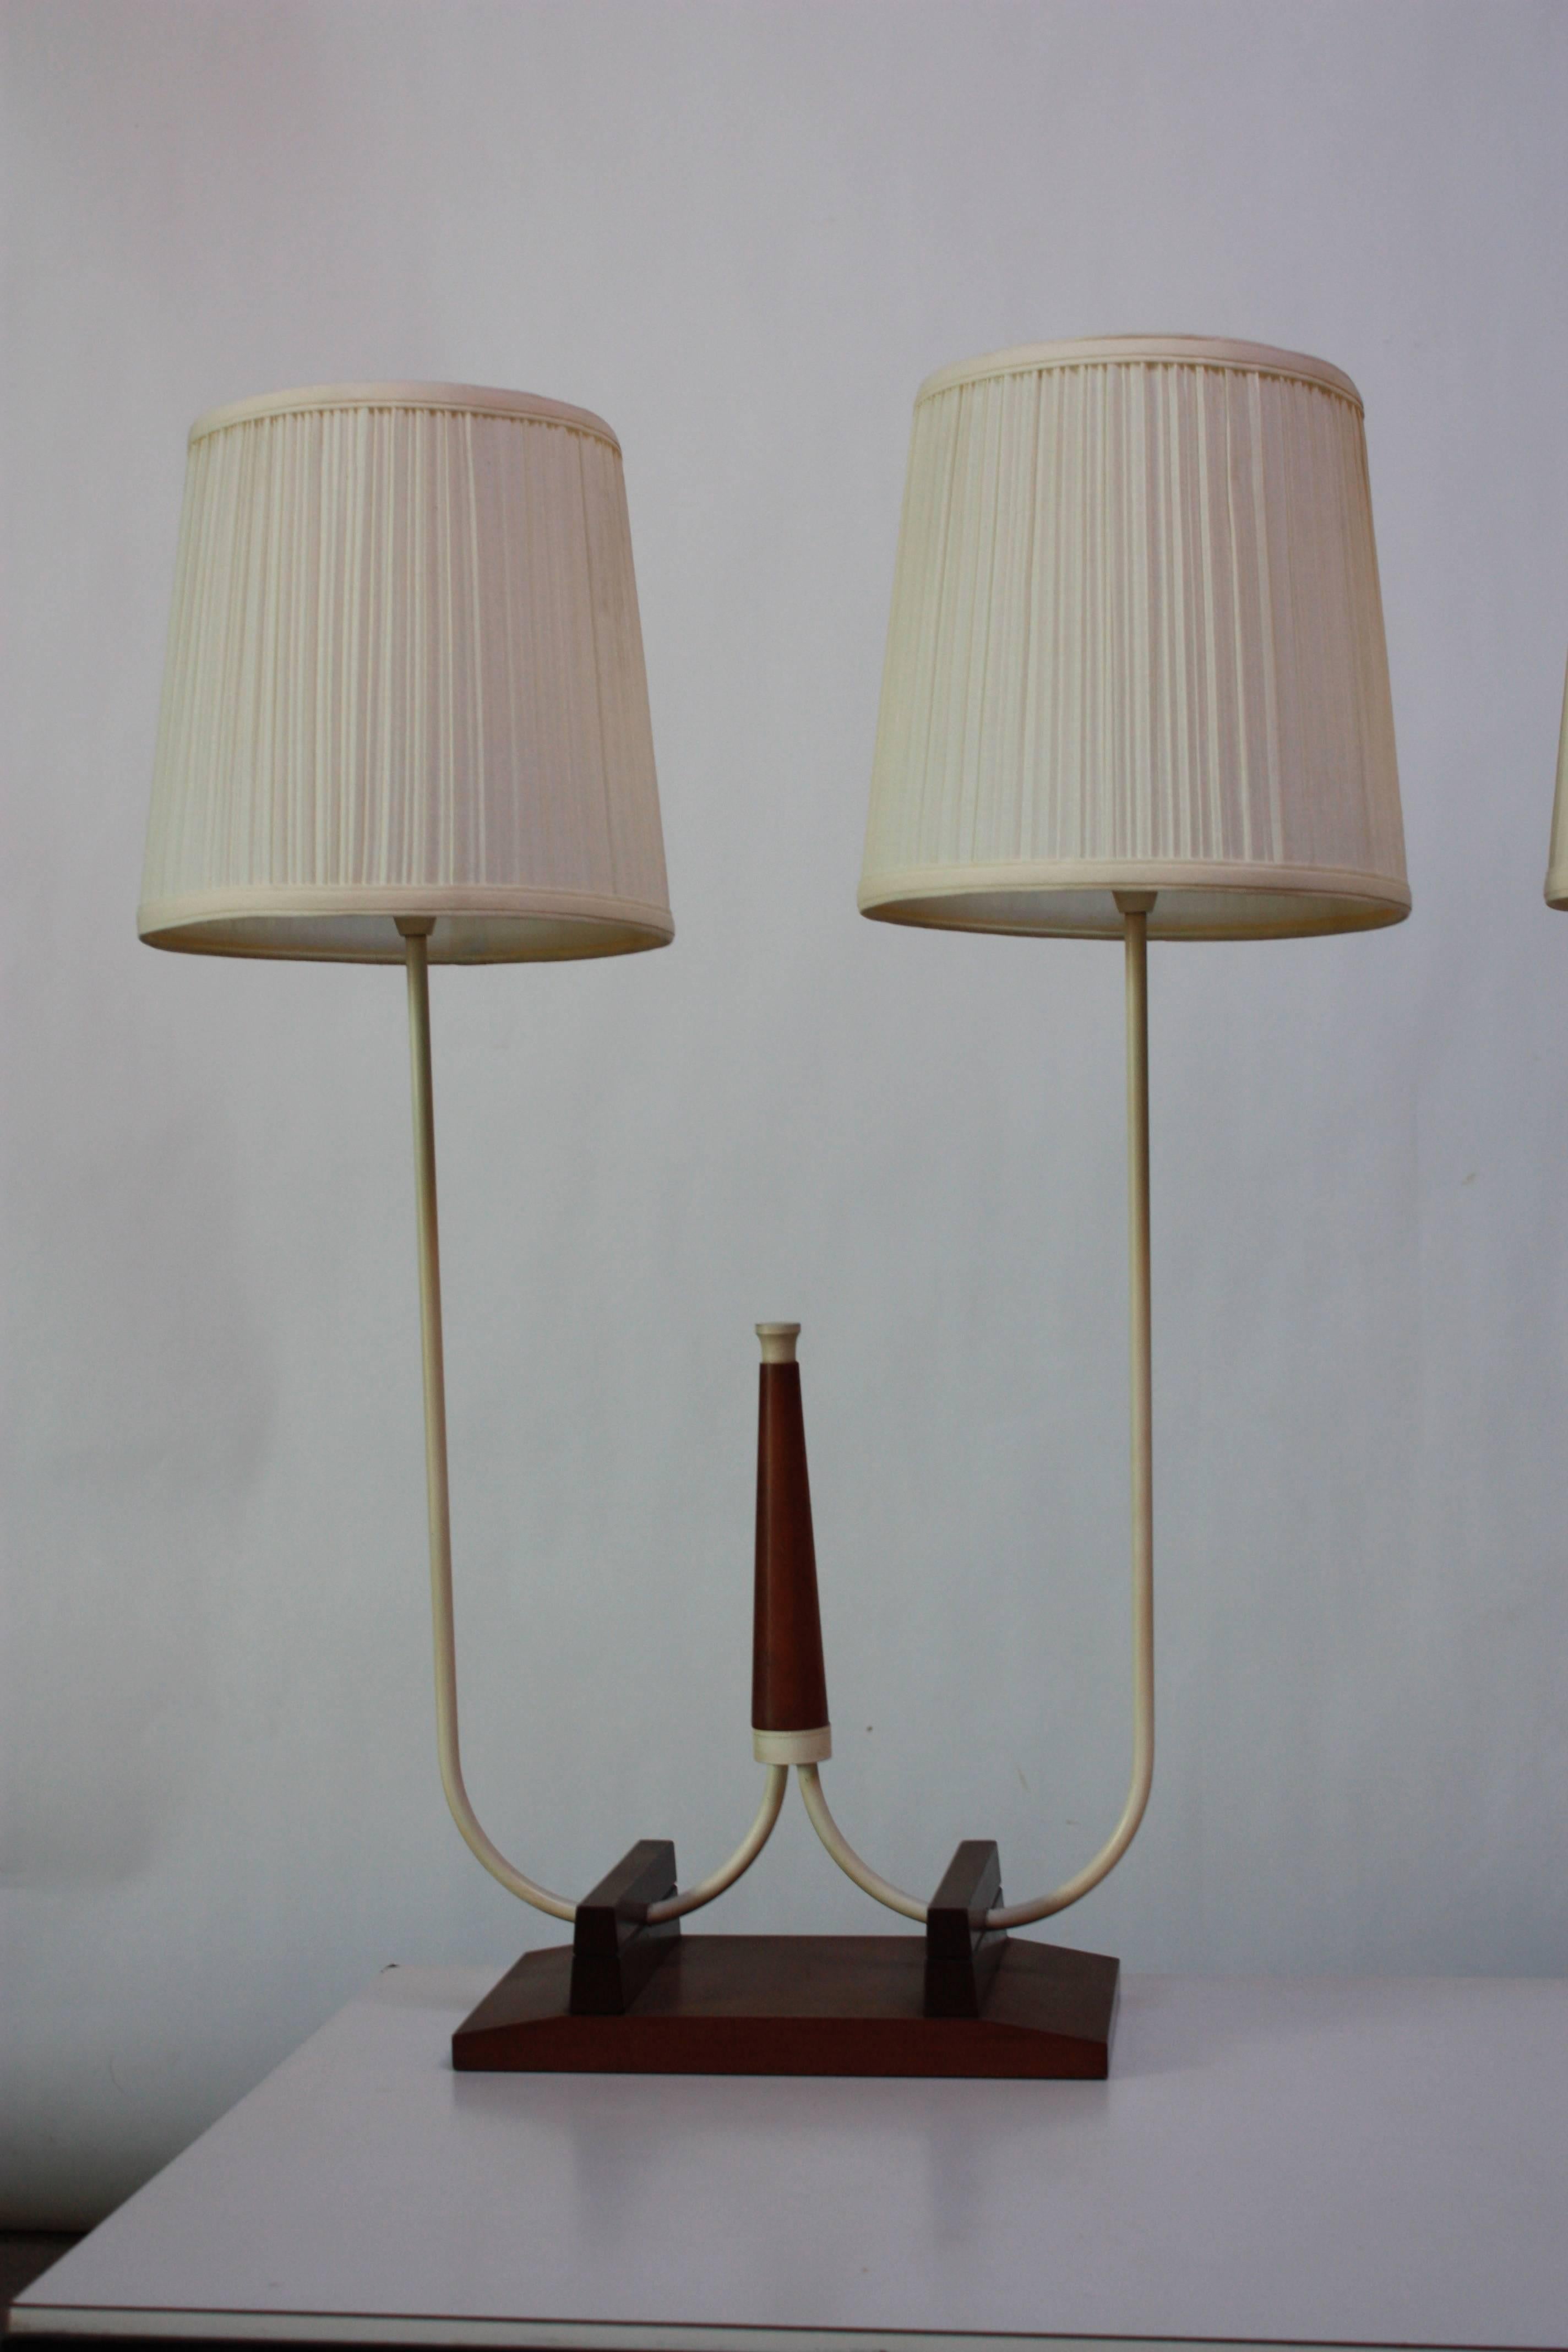 This pair of 1960s French table lamps is comprised of white enameled brass stems and finials with a walnut base and centerpiece. 
The silk shades show minor, age-appropriate wear, but the lamps themselves are in excellent, vintage condition.